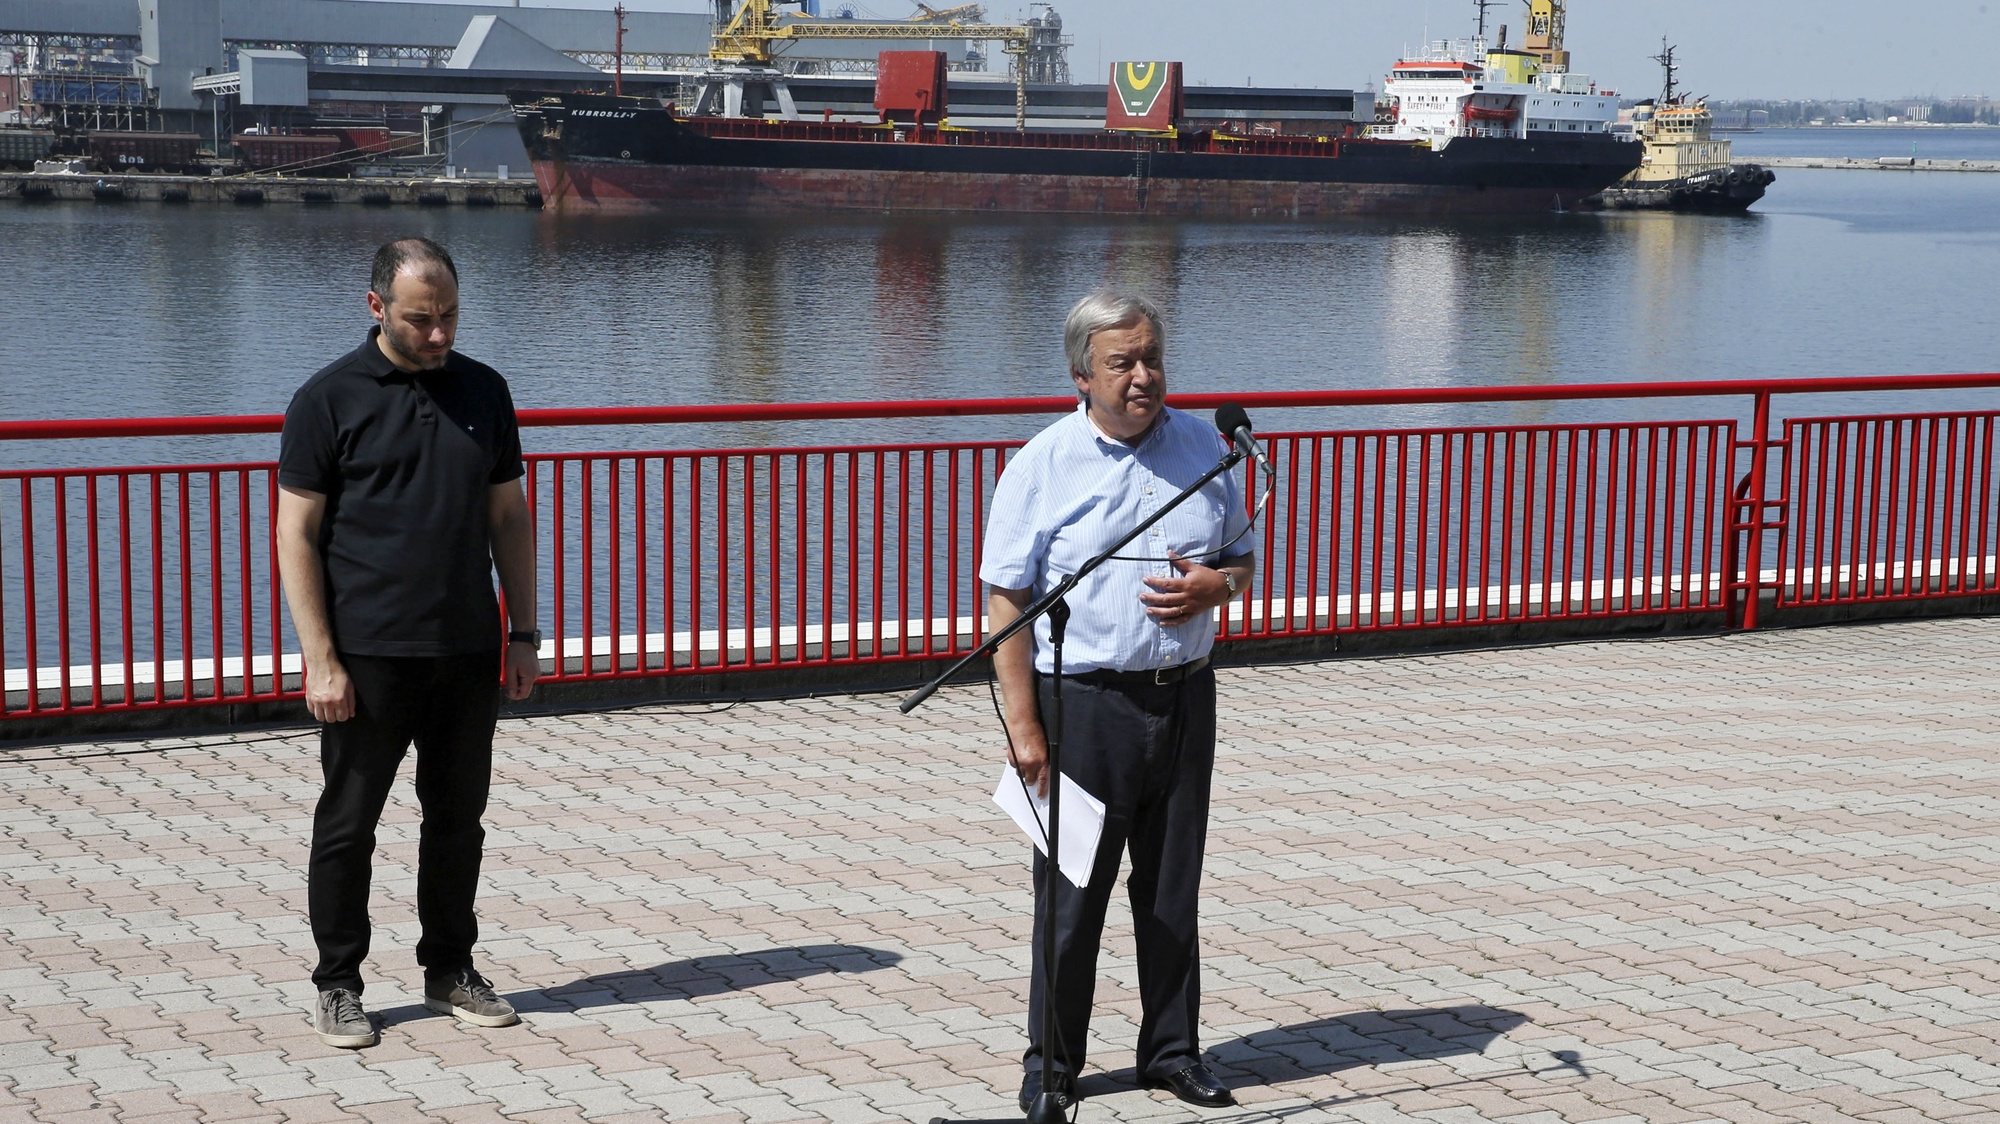 epa10128900 UN Secretary-General Antonio Guterres speaks to journalists at the end of his visit to the Odesa grain port, where in the background Comoros-flagged cargo vessel Kubrosli Y moors, in Odesa, Ukraine, 19 August 2022. Guterres arrived in Ukraine the previous dayto meet with President Zelensky and Turkish President Erdogan to talk on improving the grain initiative and the situation around the Zaporizhzhia nuclear power plant. The port of Odesa is being used for the export of Ukrainian grain through the Ukraine-Russia agreement promoted by the UN and Turkey. Russian troops on 24 February entered Ukrainian territory, starting a conflict that has provoked destruction and a humanitarian crisis.  EPA/MANUEL DE ALMEIDA